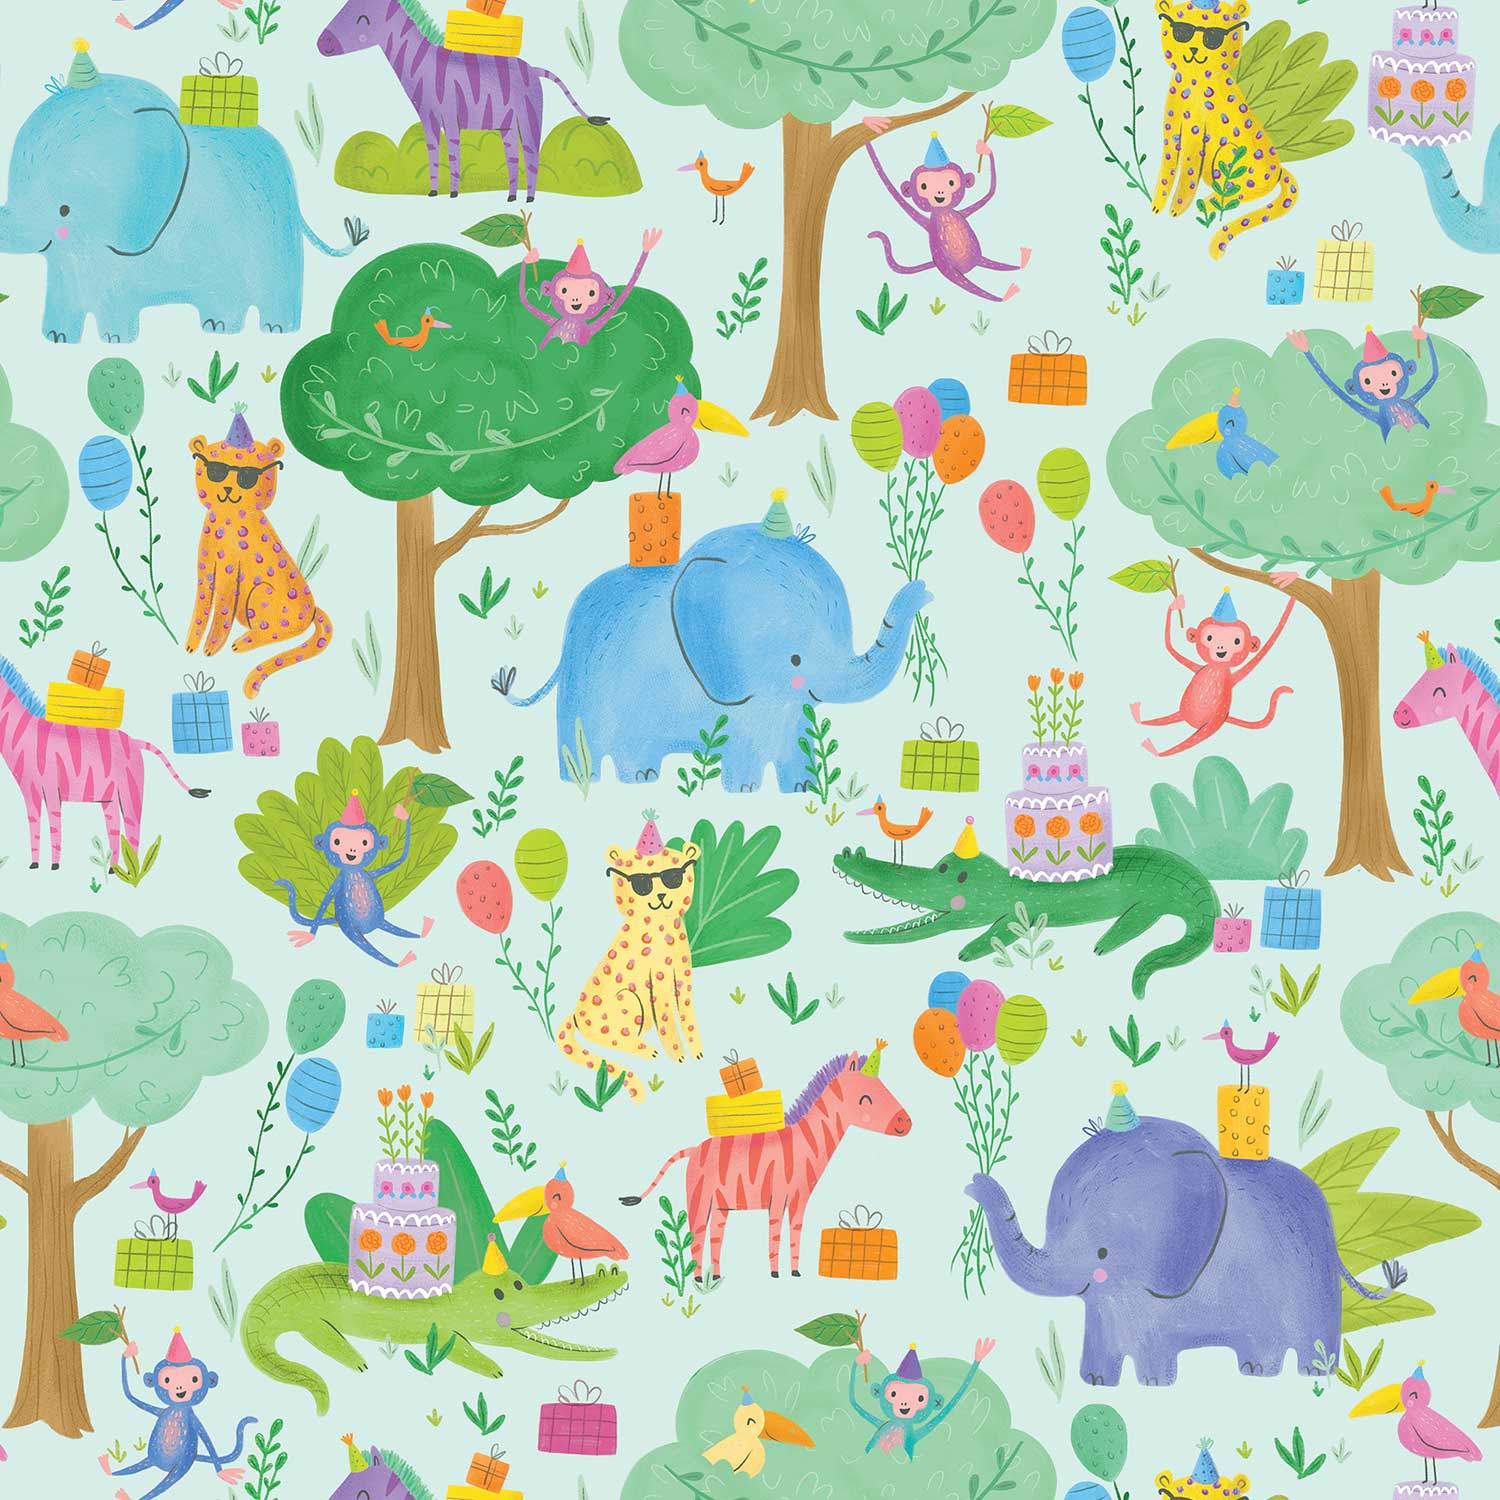 B328a Jungle Party Birthday Gift Wrapping Paper Swatch 